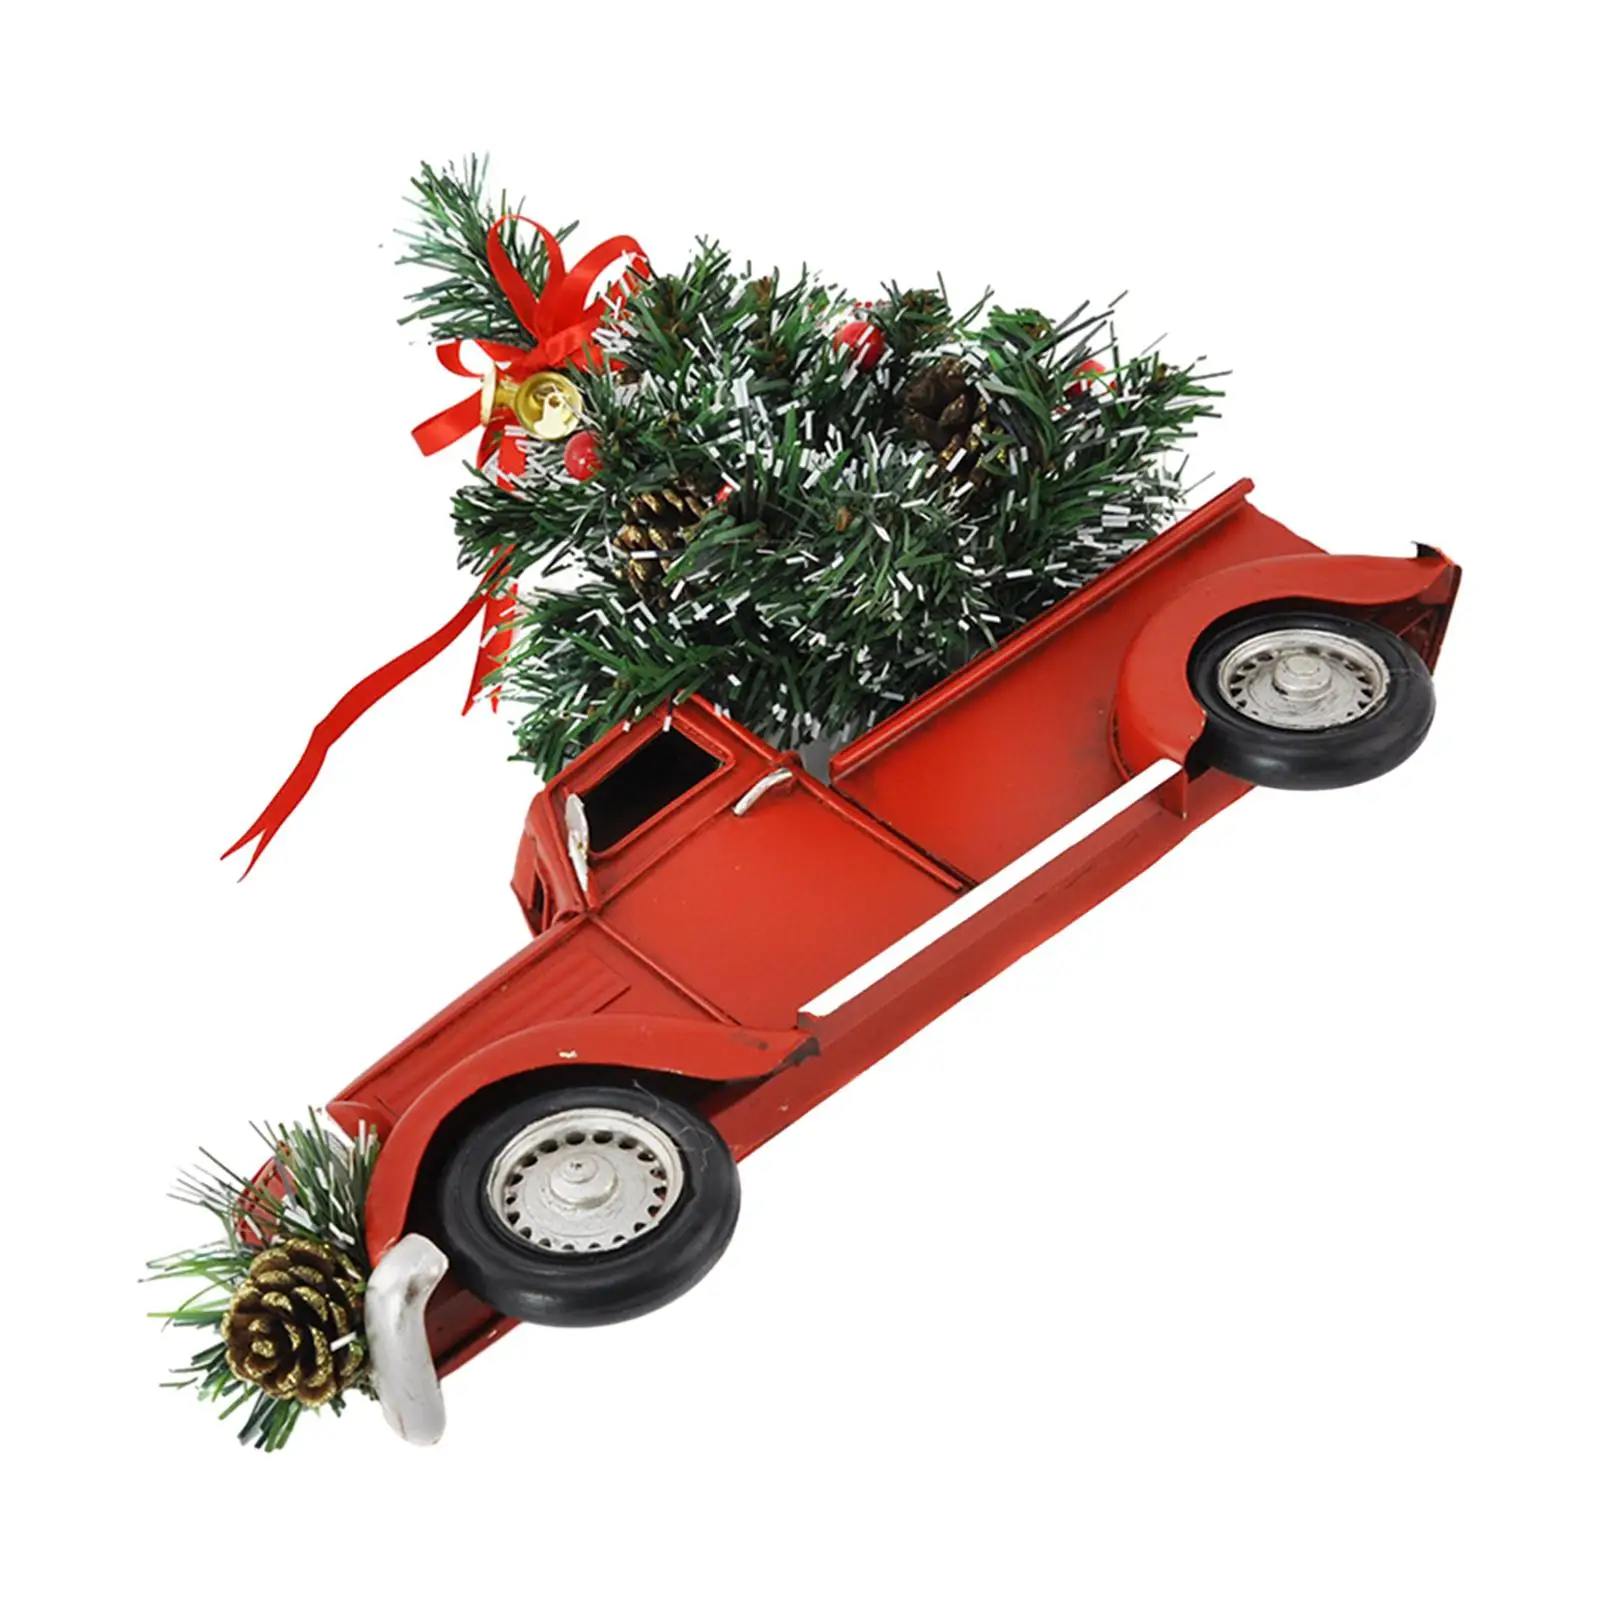 Metal Pickup Truck Car Model Metal Pickup Model Truck Christmas Decoration for Farmhouse Table Party Living Room Ornaments